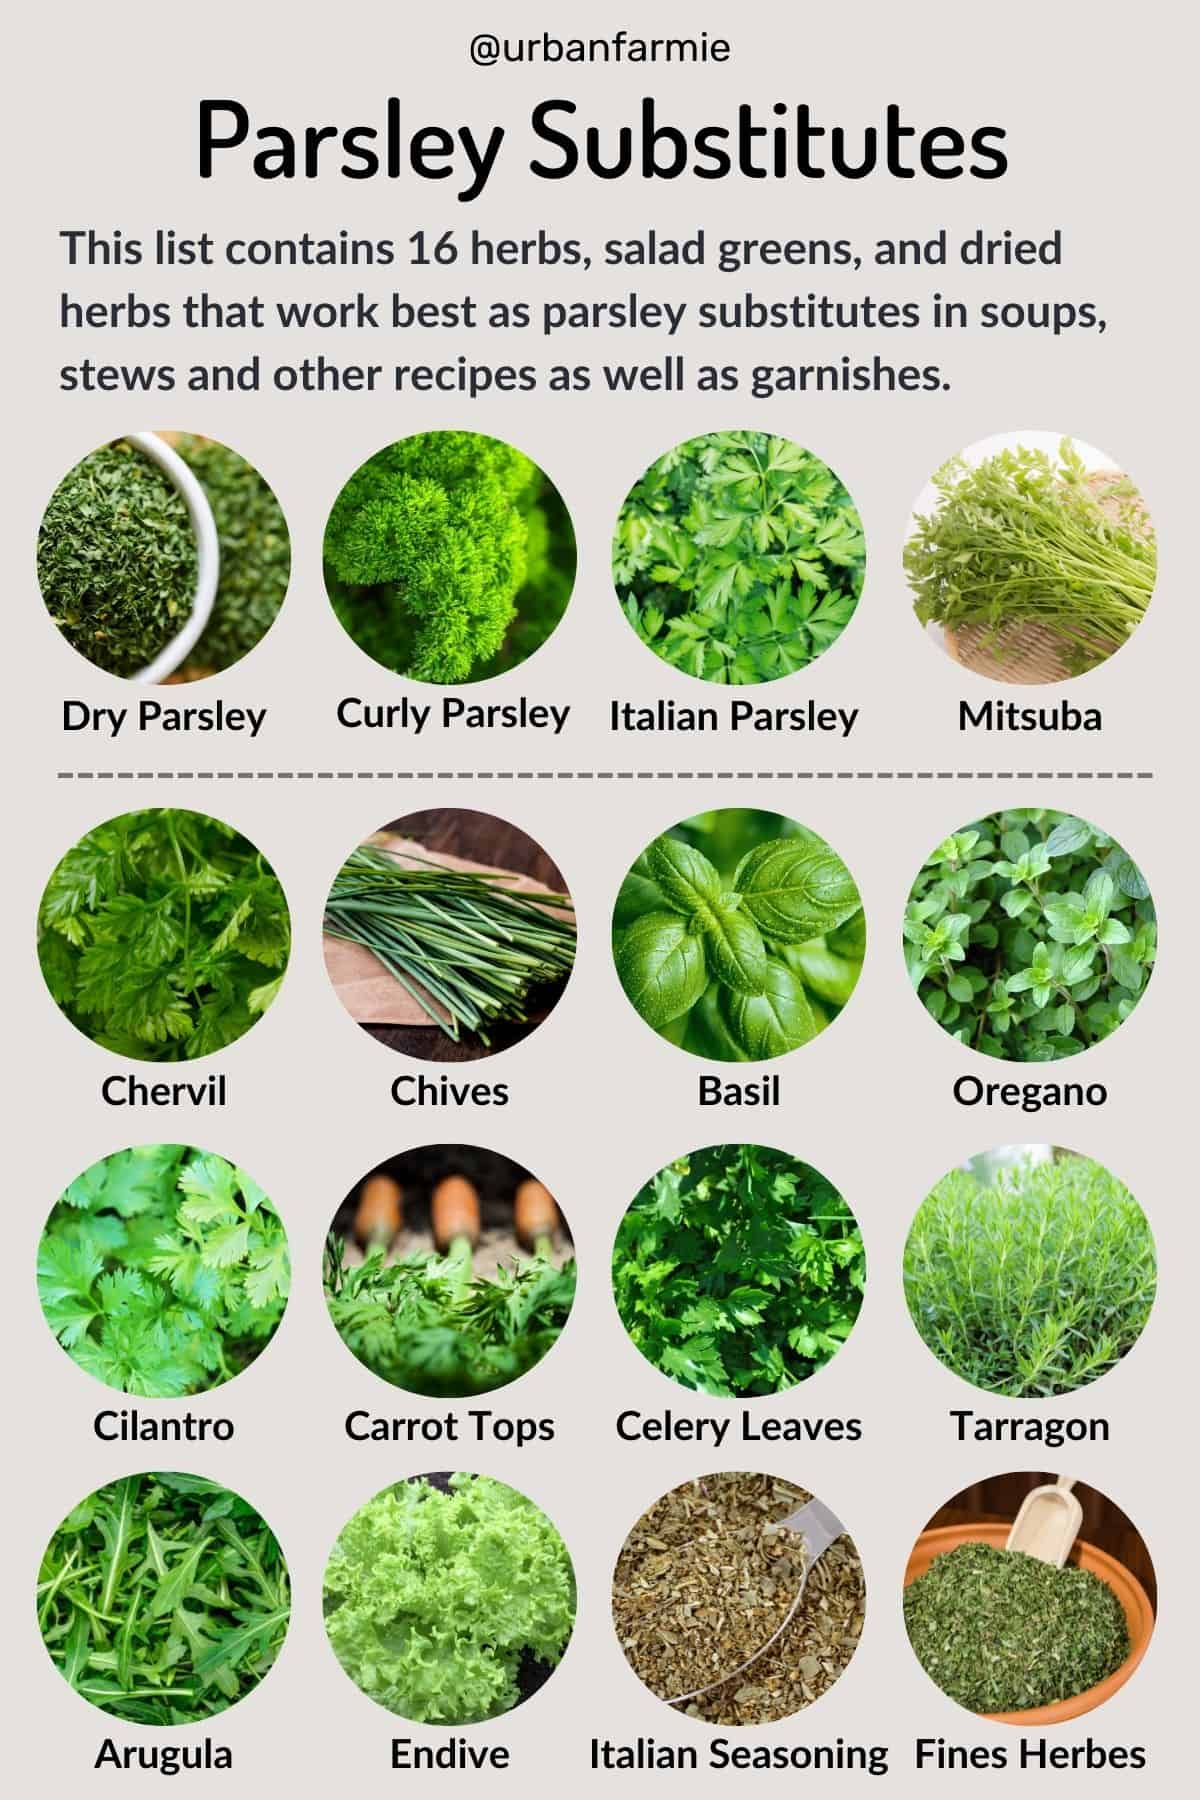 Infographic showing 12 potential substitutes for parsley - check post for details!